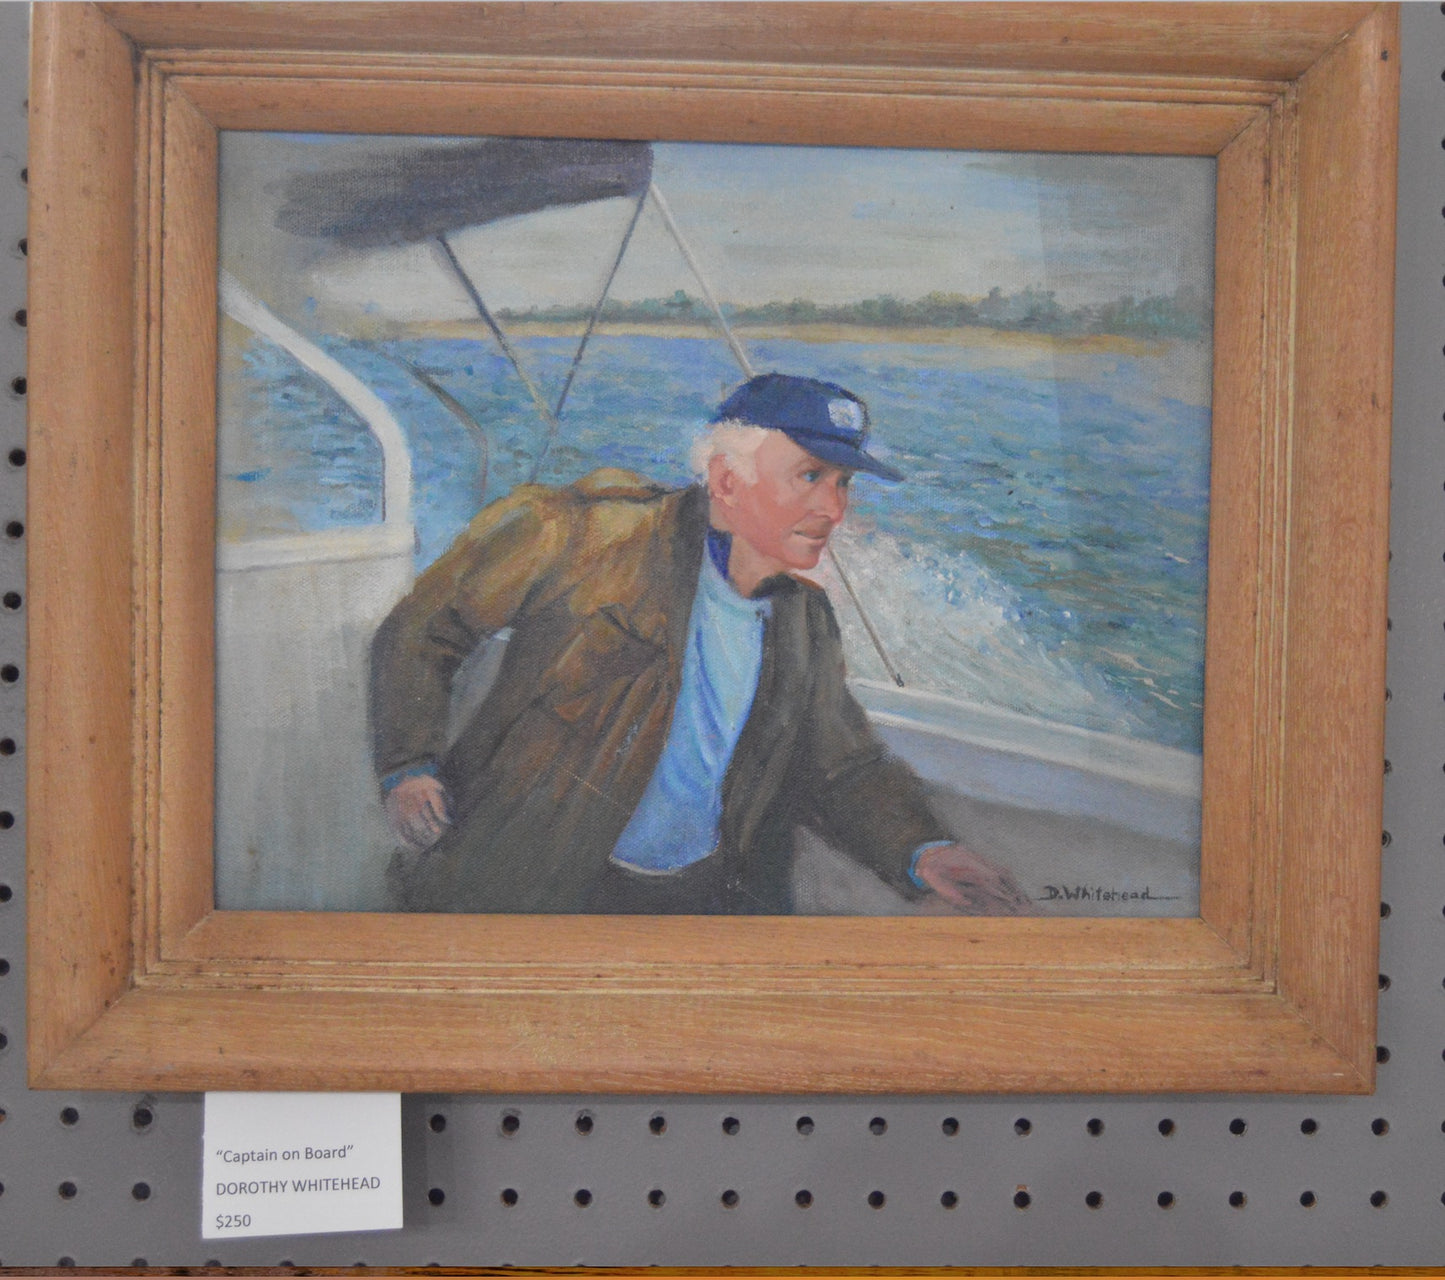 Captain on Board by Dorothy Whitehead